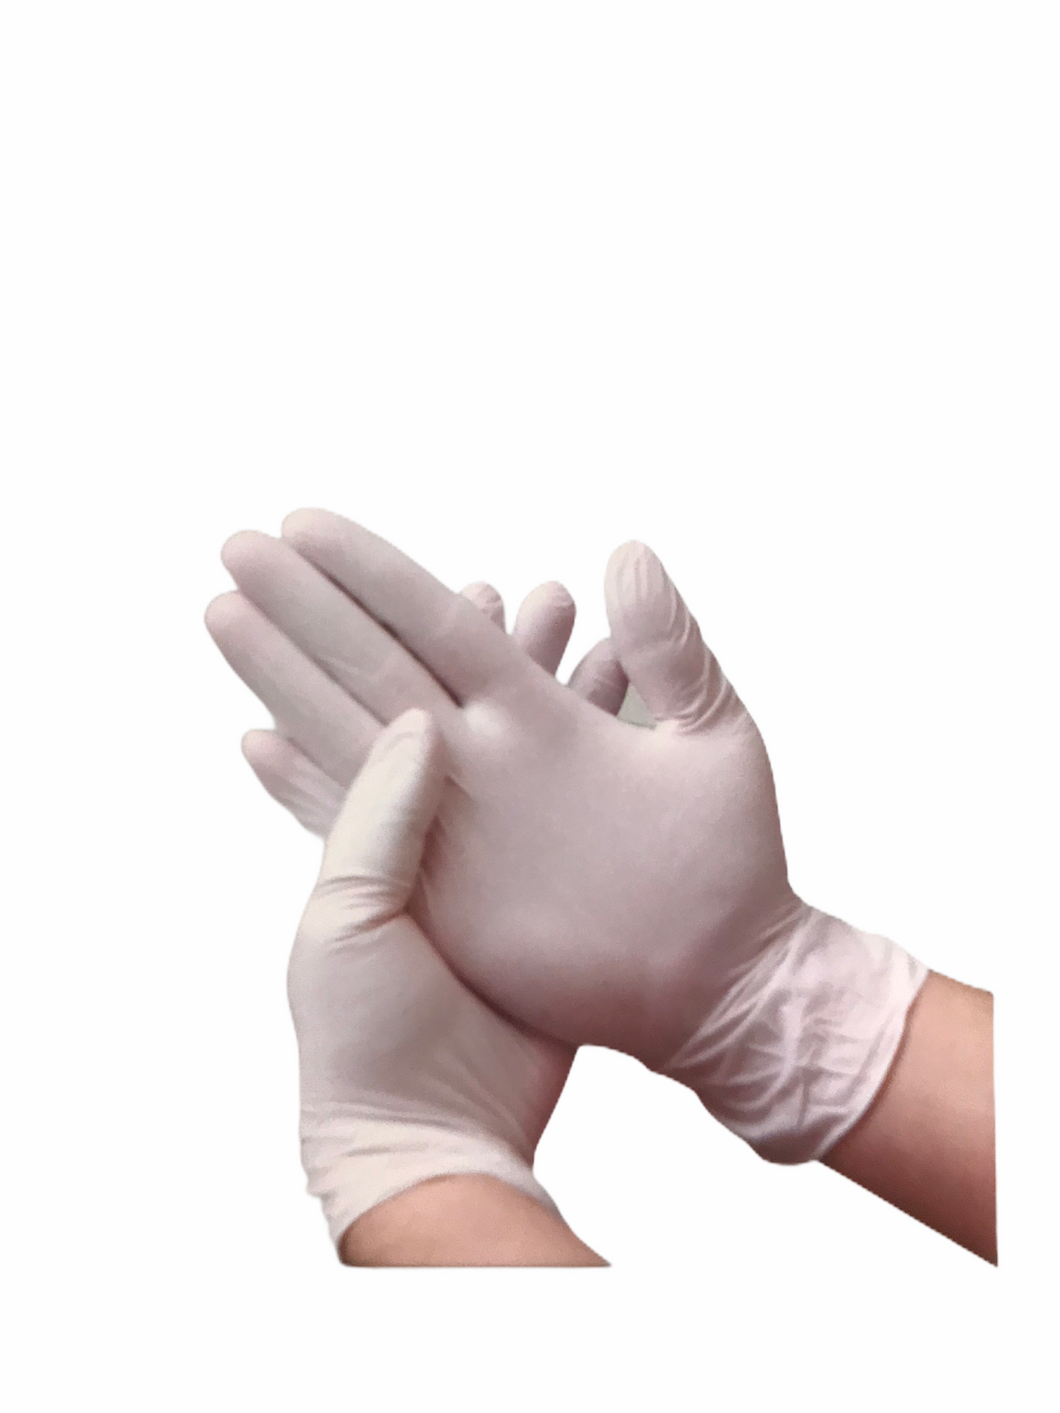 Clear examination vinyl gloves for medical and food handling, disposable and latex-free, 100% synthetic material.